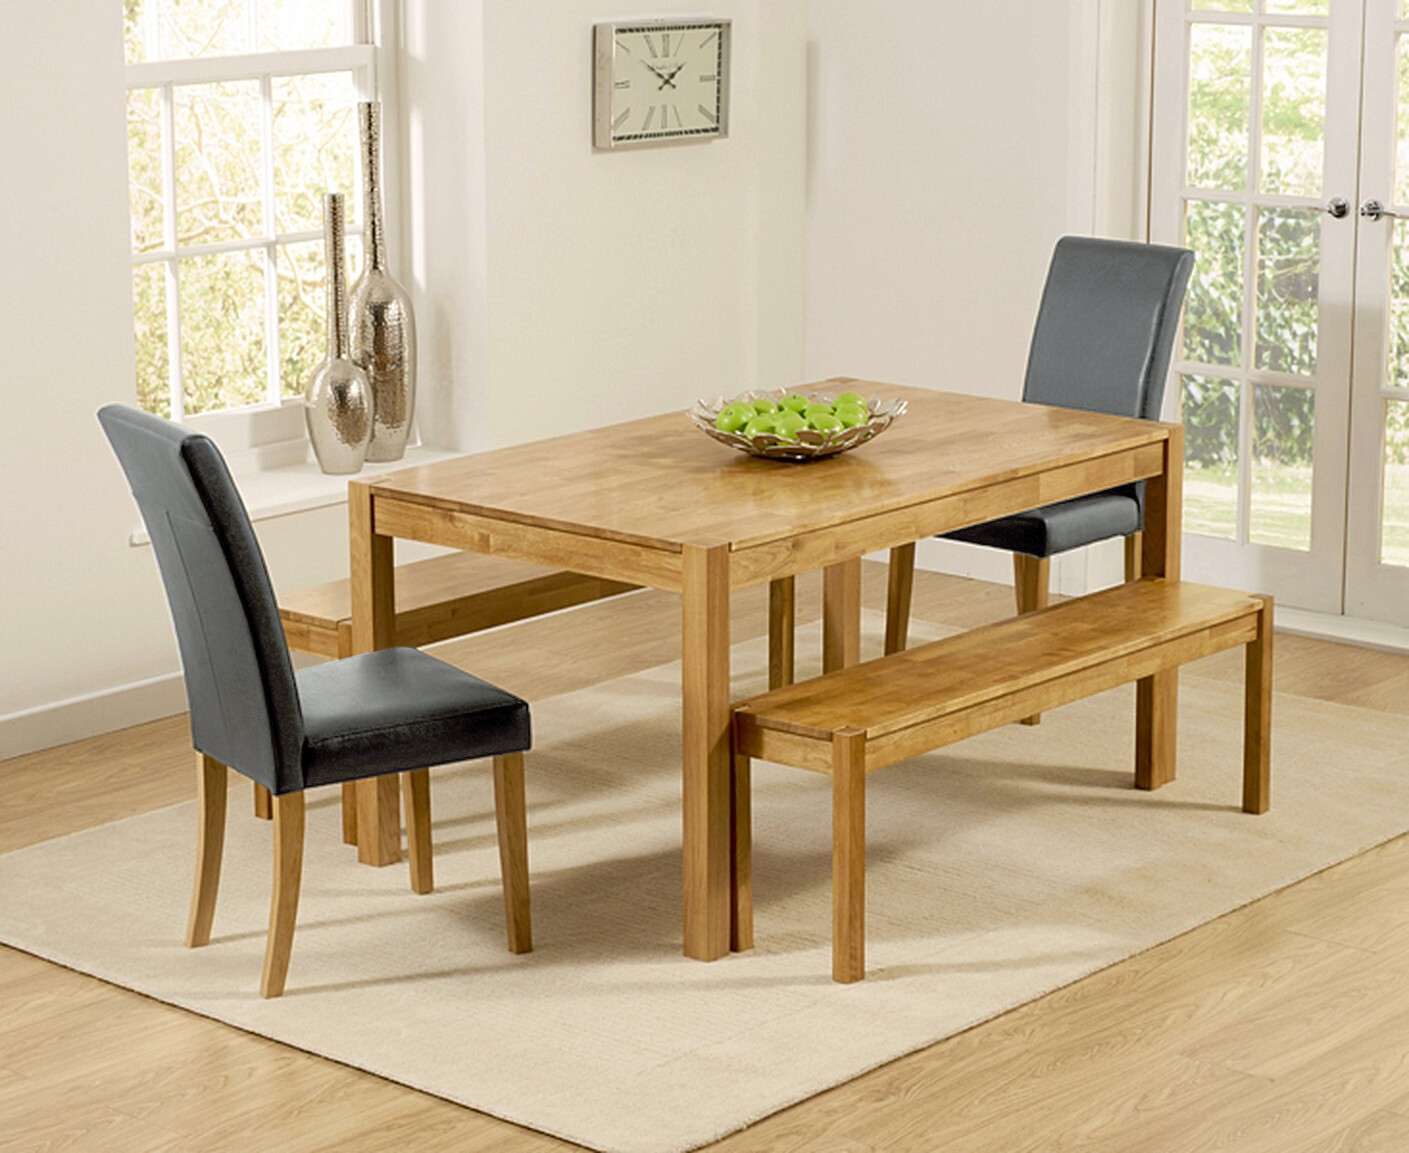 Photo 1 of York 150cm solid oak dining table with 4 grey olivia chairs and 1 york benches